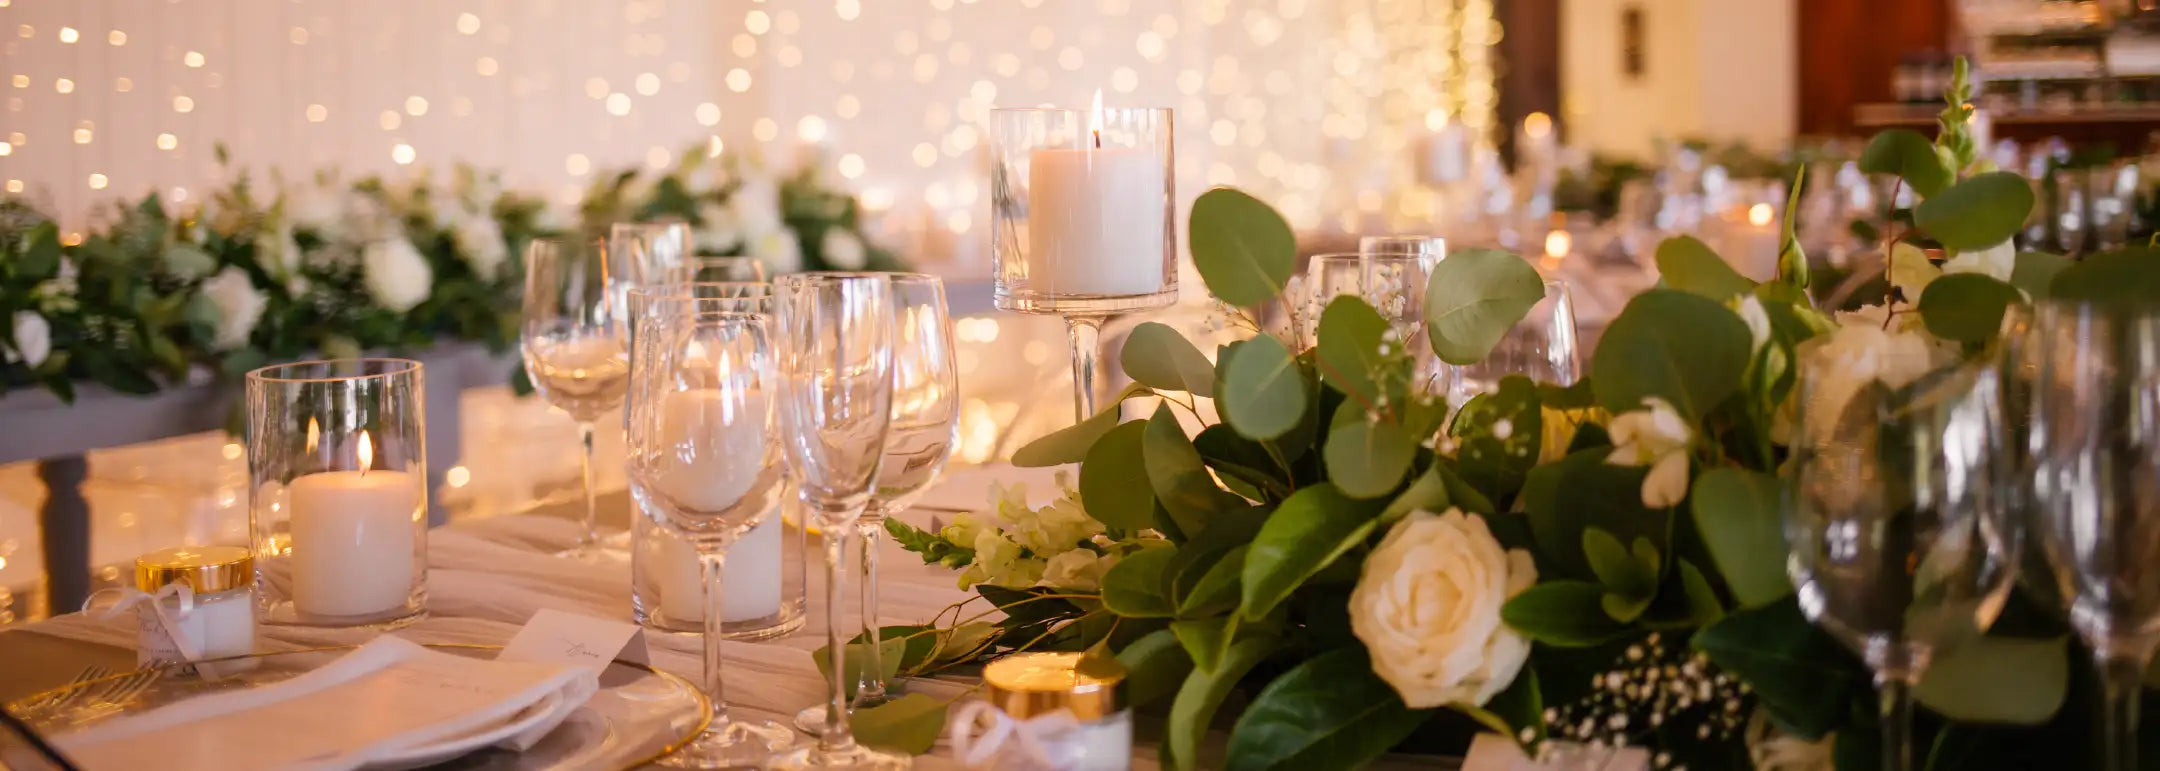 Exquisite event table setting with floral centrepieces, candles, and elegant glassware, creating a luxurious and sophisticated ambiance for special occasions. Fabulous Flowers and Gifts.